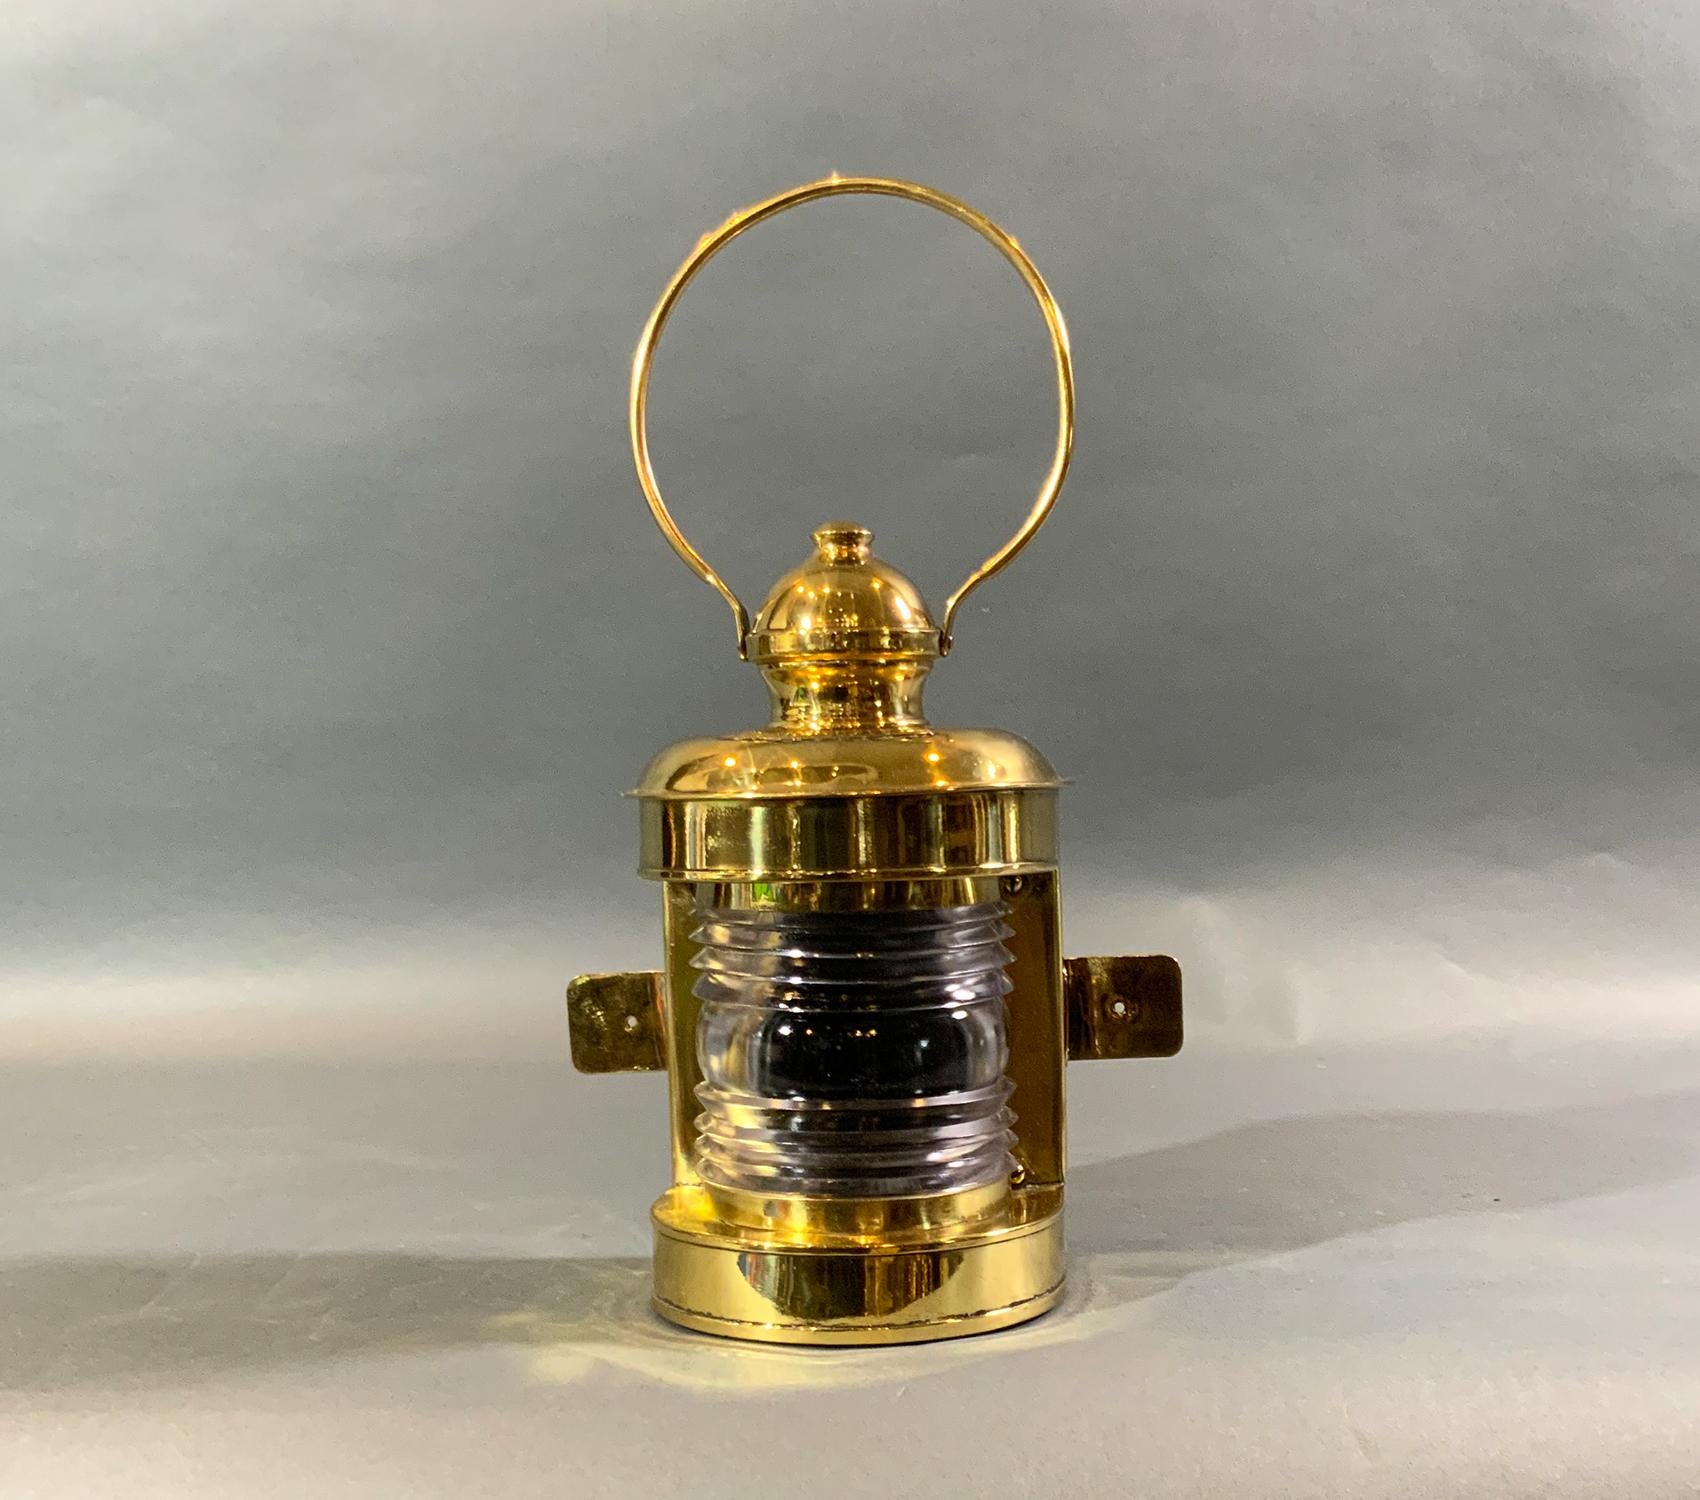 Highly polished and lacquered one hundred-year-old ship’s lantern with Fresnel glass lens, mounting flanges, hoop carry handle, etc. Maker’s name is Perkins Marine Lamp Corporation, Brooklyn, N.Y. Wired for home use. Special piece.

Weight: 8